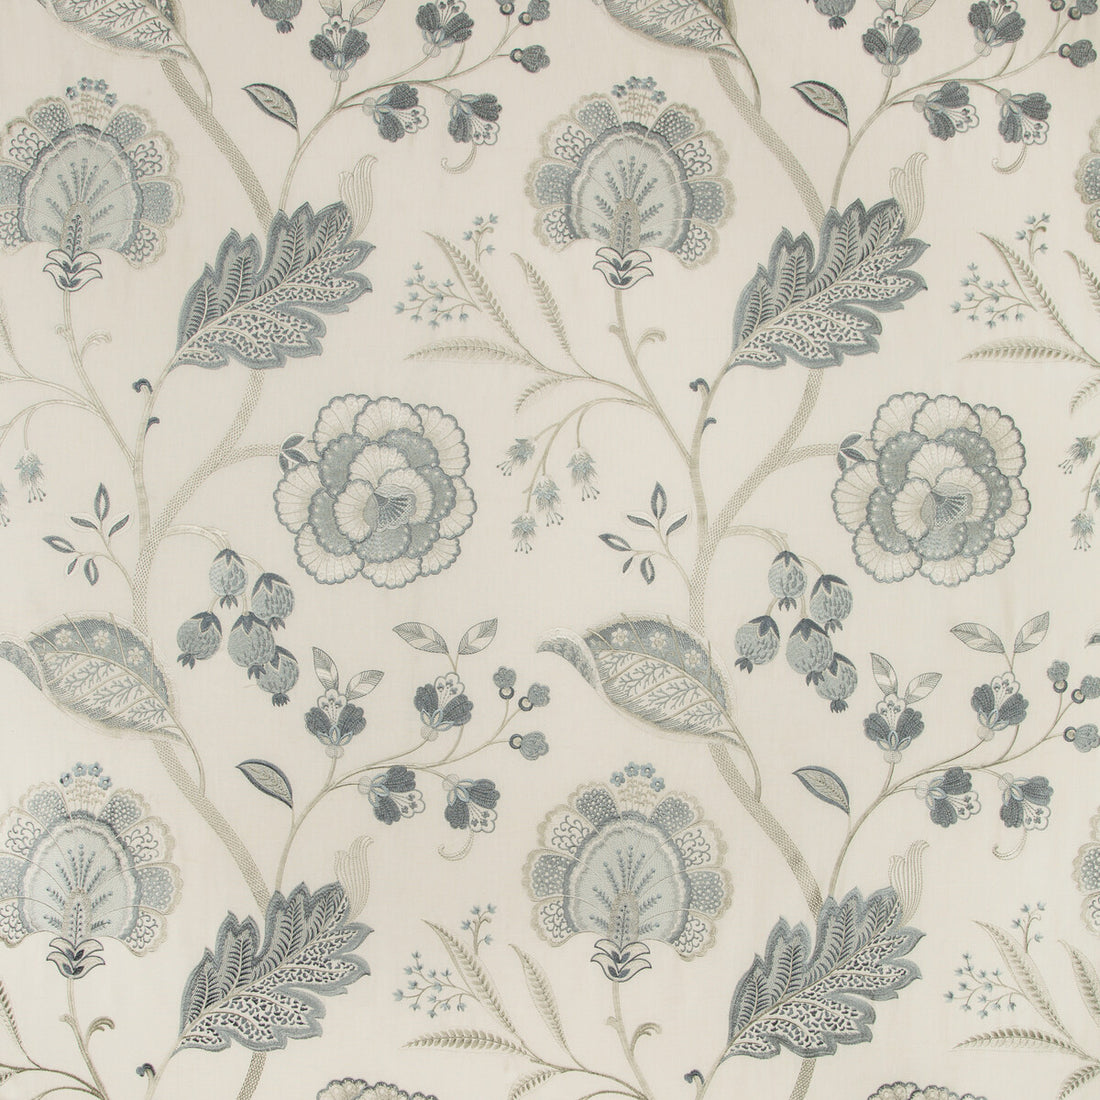 Aston Embroidery fabric in frost color - pattern 2019100.115.0 - by Lee Jofa in the Manor House collection